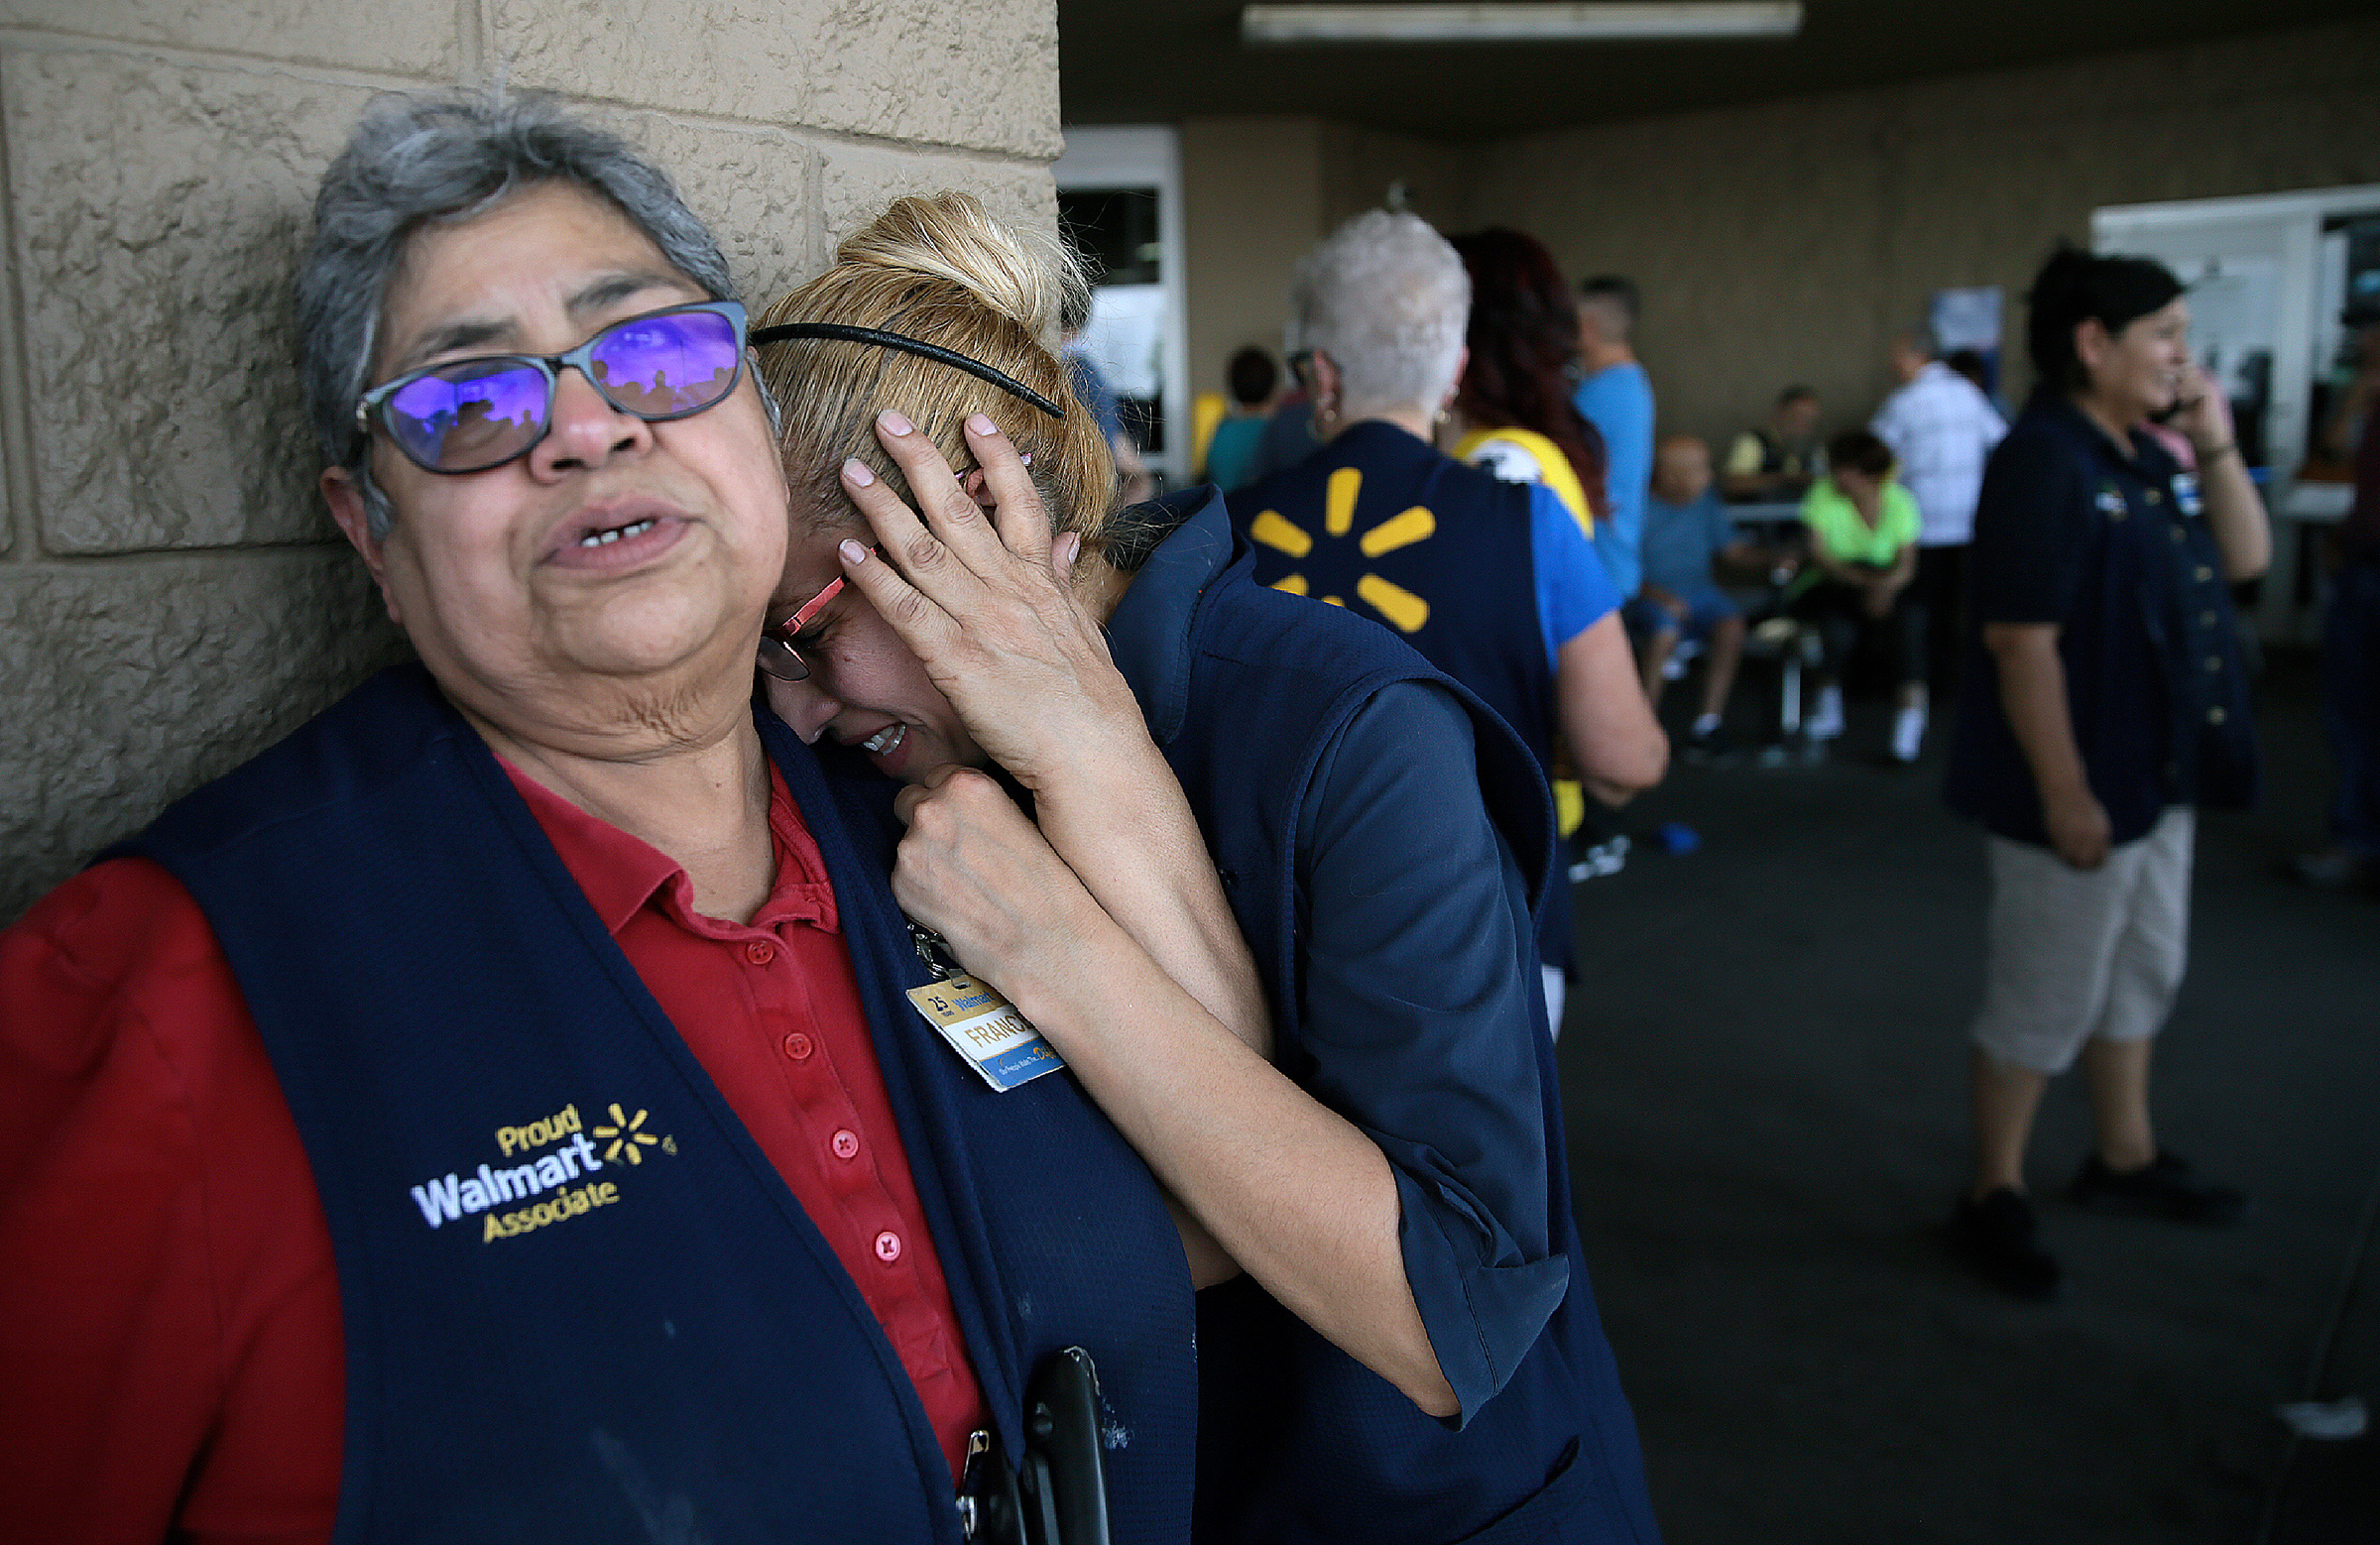 Walmart employees react after an active shooter opened fire at the store in El Paso, Texas, Saturday, Aug. 3, 2019. (Mark Lambie—The El Paso Times/AP)